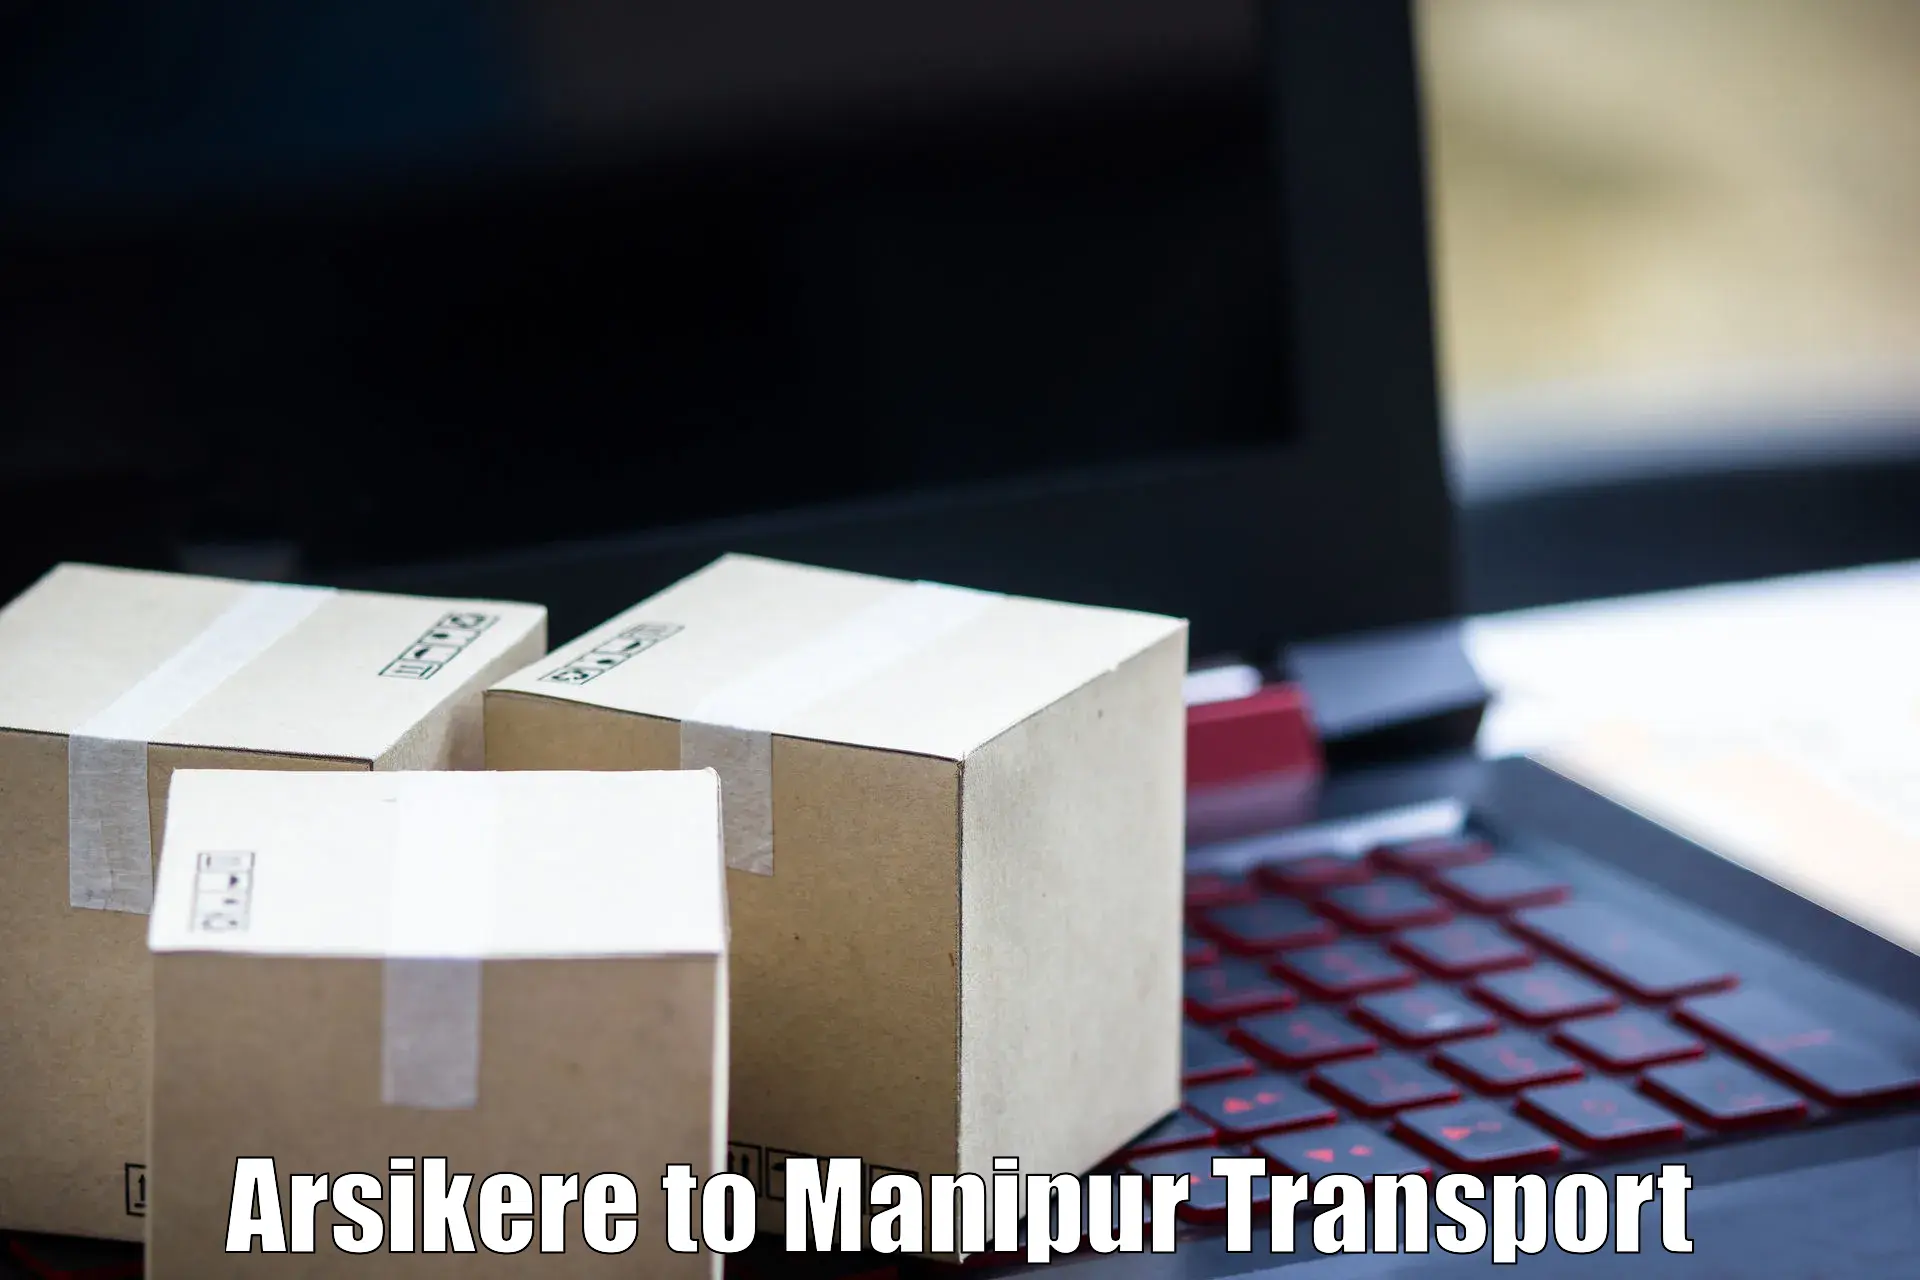 Road transport online services Arsikere to Manipur